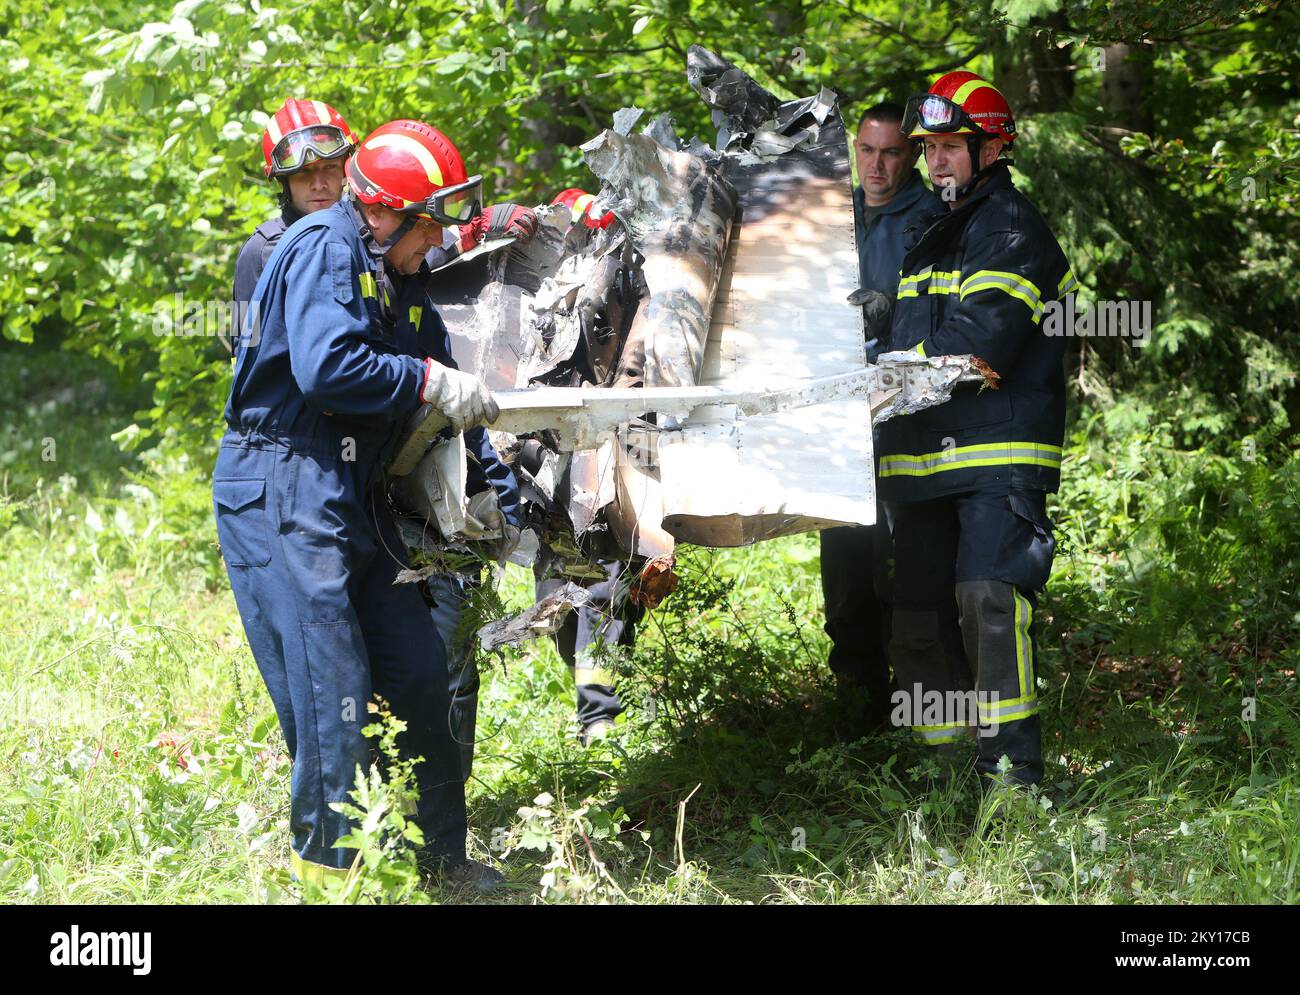 Helicopter pulled out parts of the small crashed plane, in which 4 people were killed, near Brocanac, central Croatia, on June 1, 2022. The action of pulling out the parts by helicopter lasted for an hour, and firefighters, the army and the police took part.The plane went missing on Sunday after taking off from the Adriatic Sea port of Split toward Germany. Local media reported that the weather in the area was bad and that the pilot sent an appeal for help before crashing.The plane crashed in a mountainous area and its wreckage was found in the hamlet of Brocanac. Photo: Kristina Stedul Fabac Stock Photo